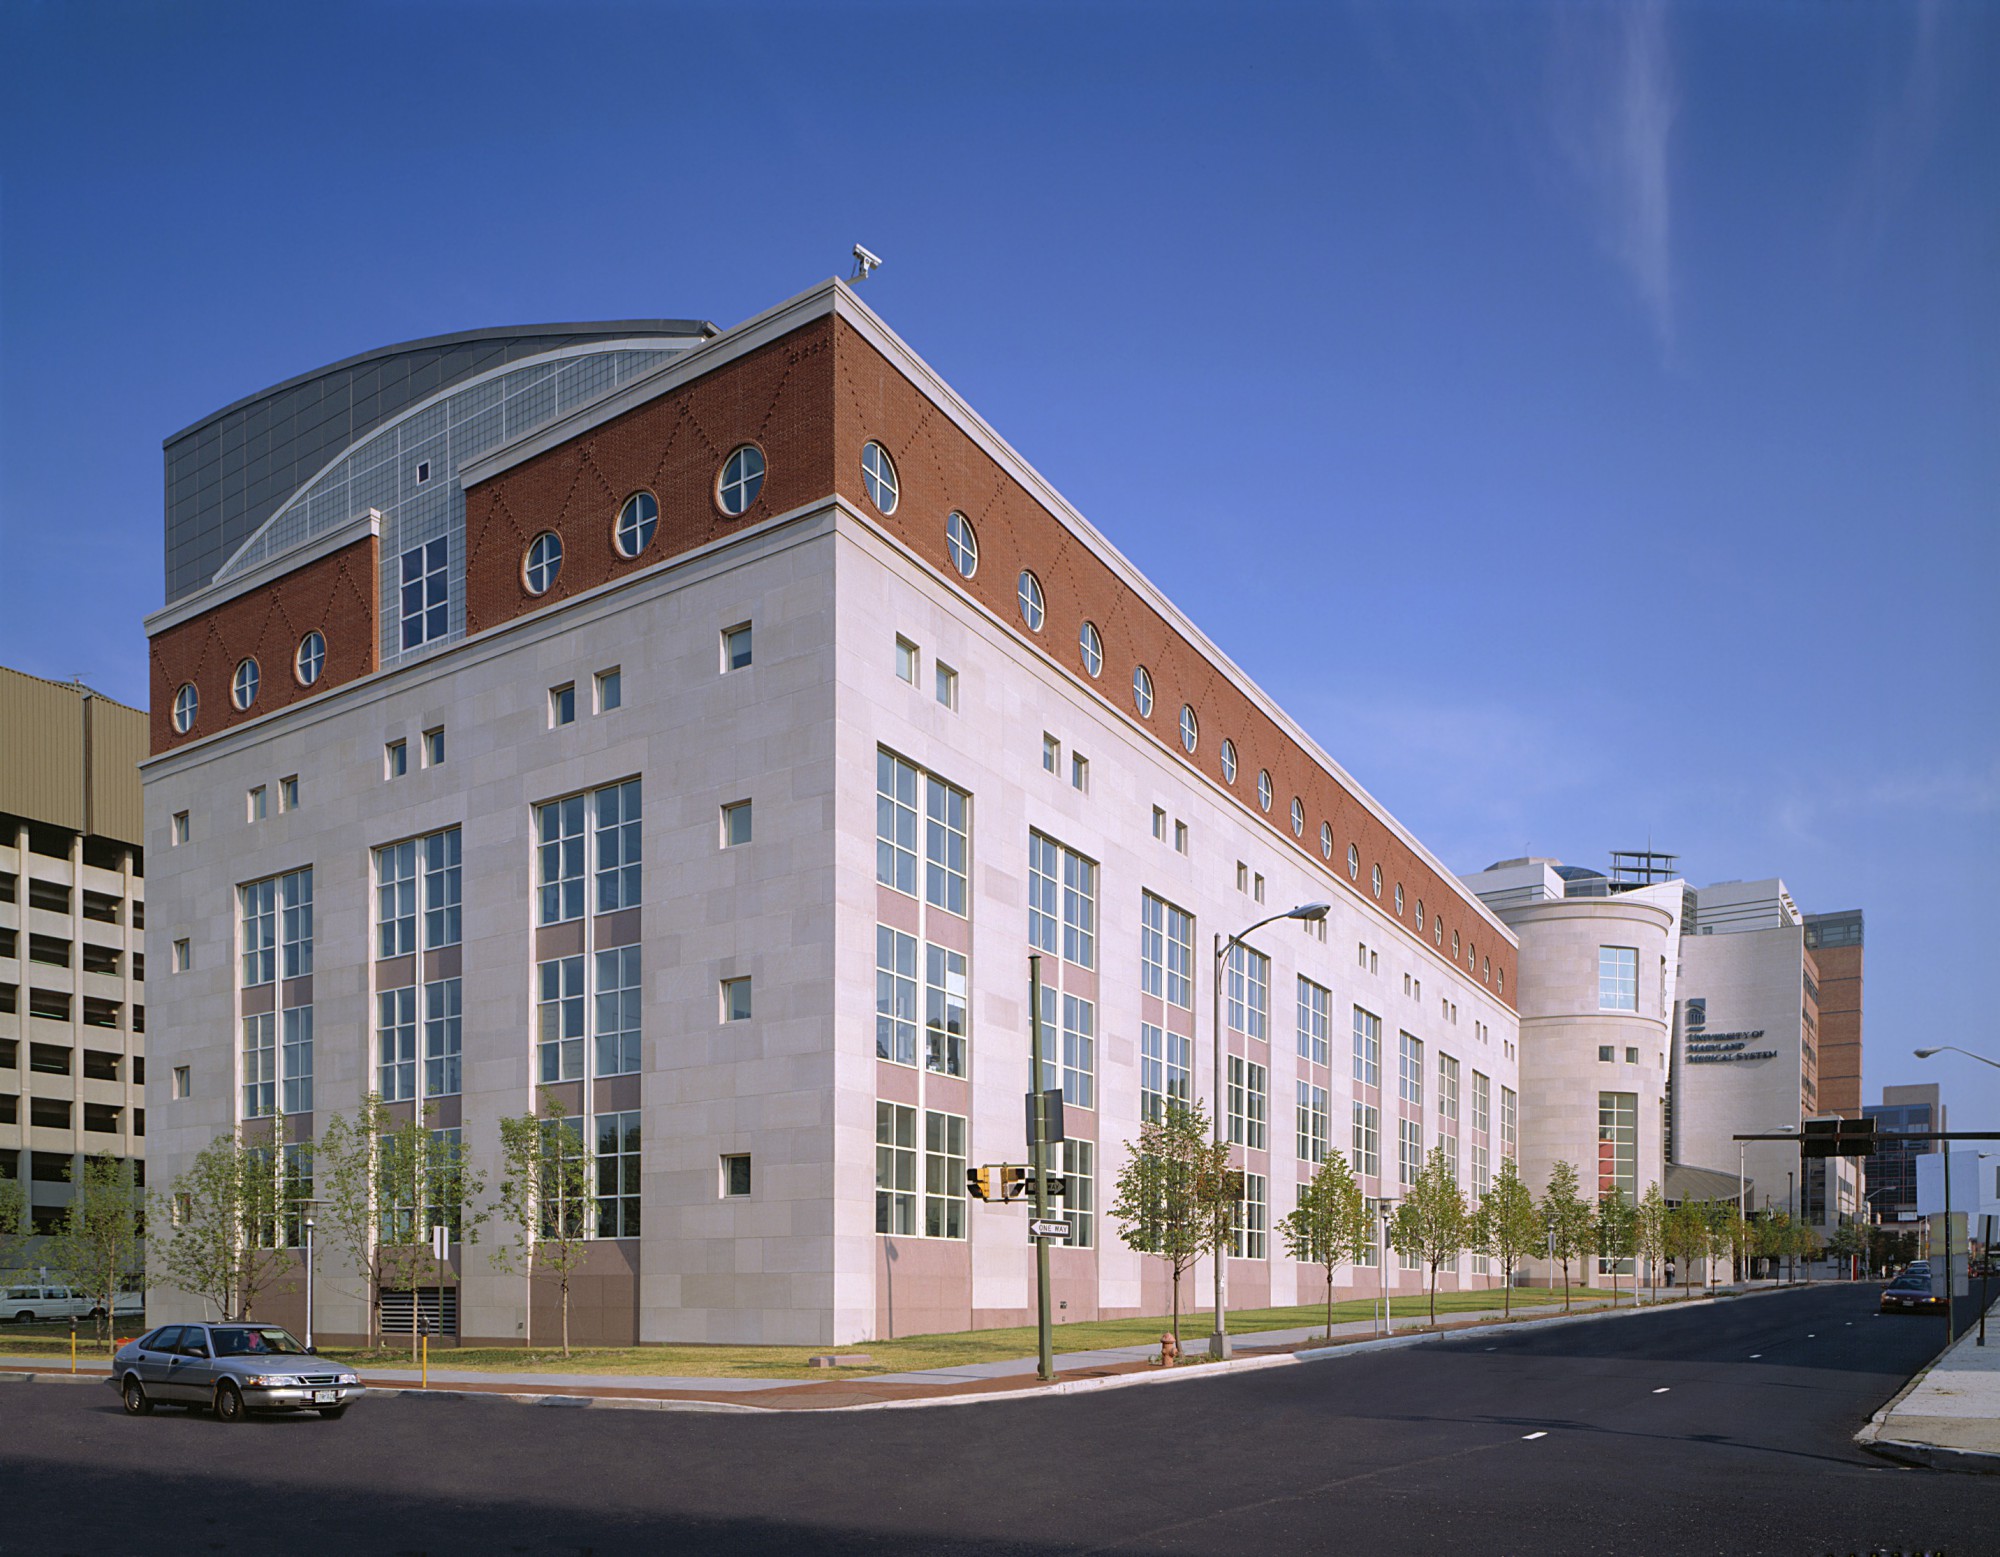 Health Sciences and Human Services Library - University of Maryland